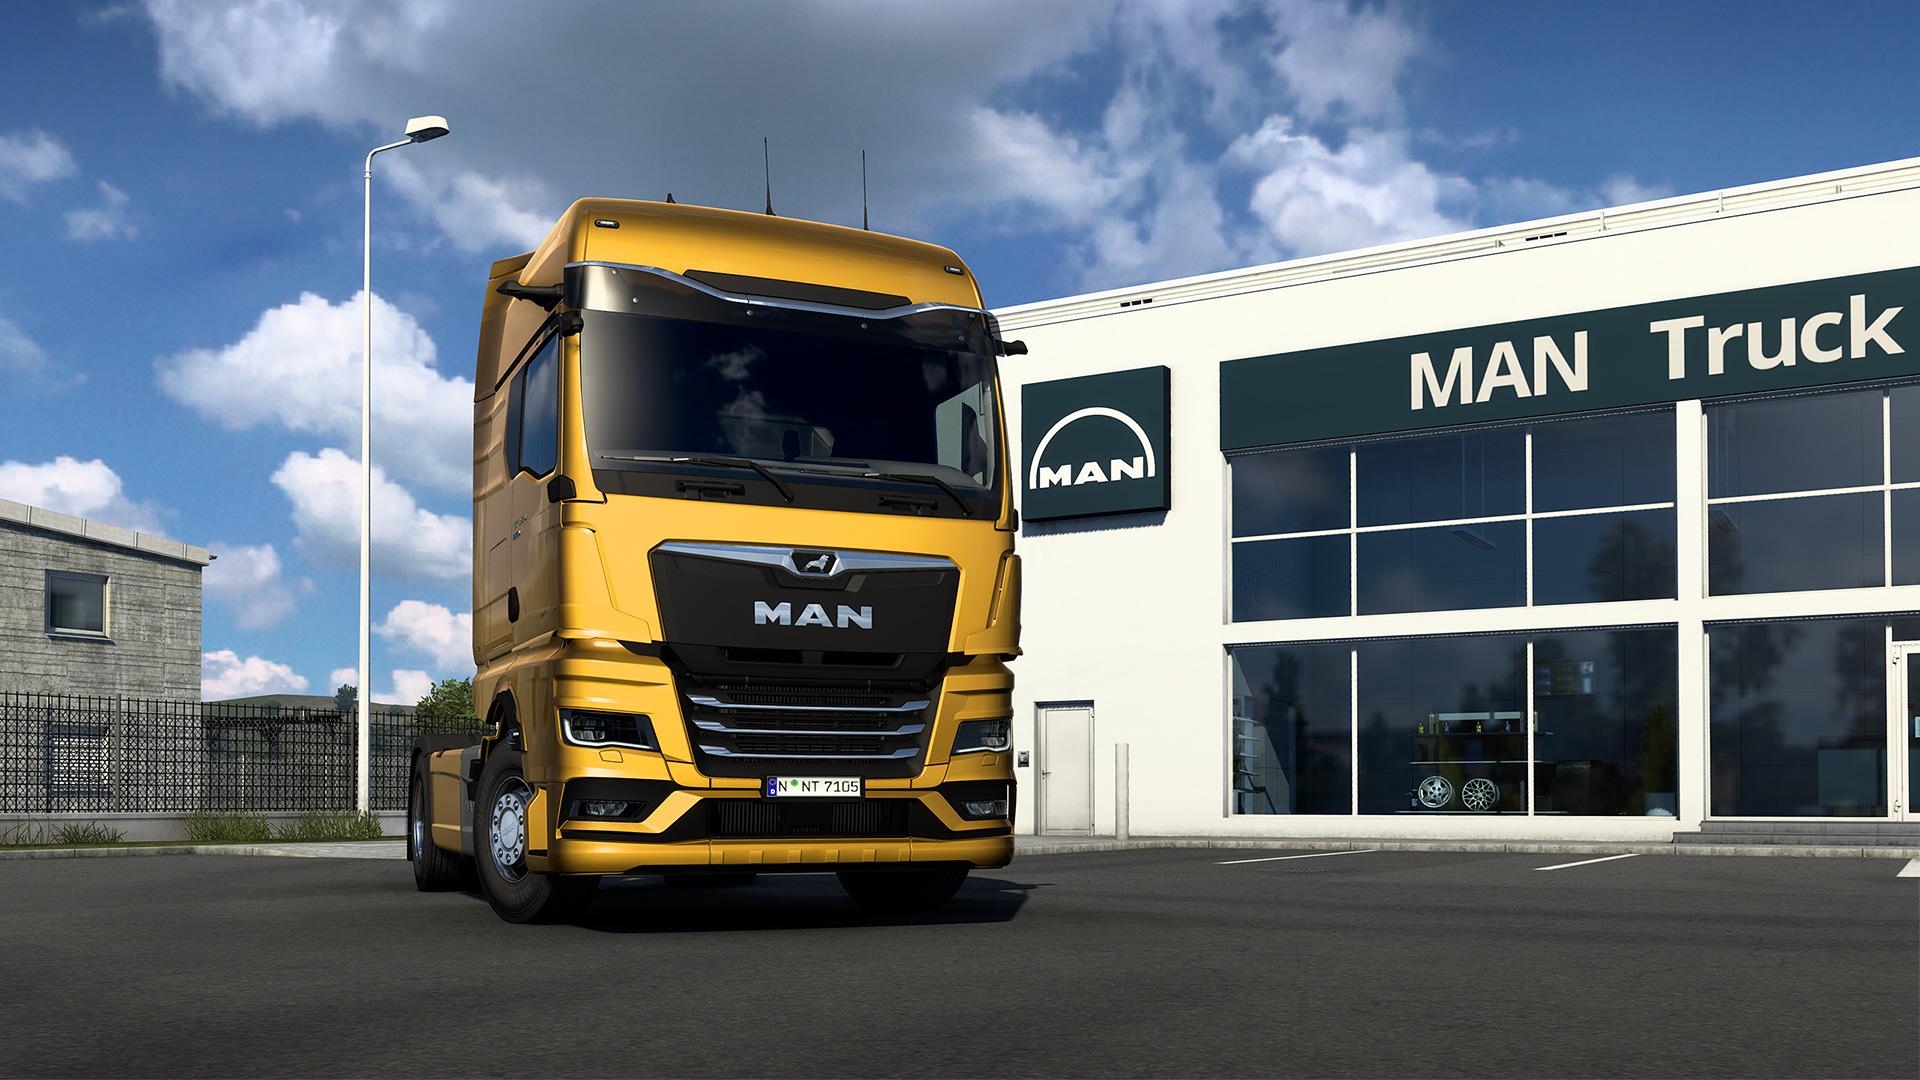 Free Euro Truck Simulator 2 truck update available now